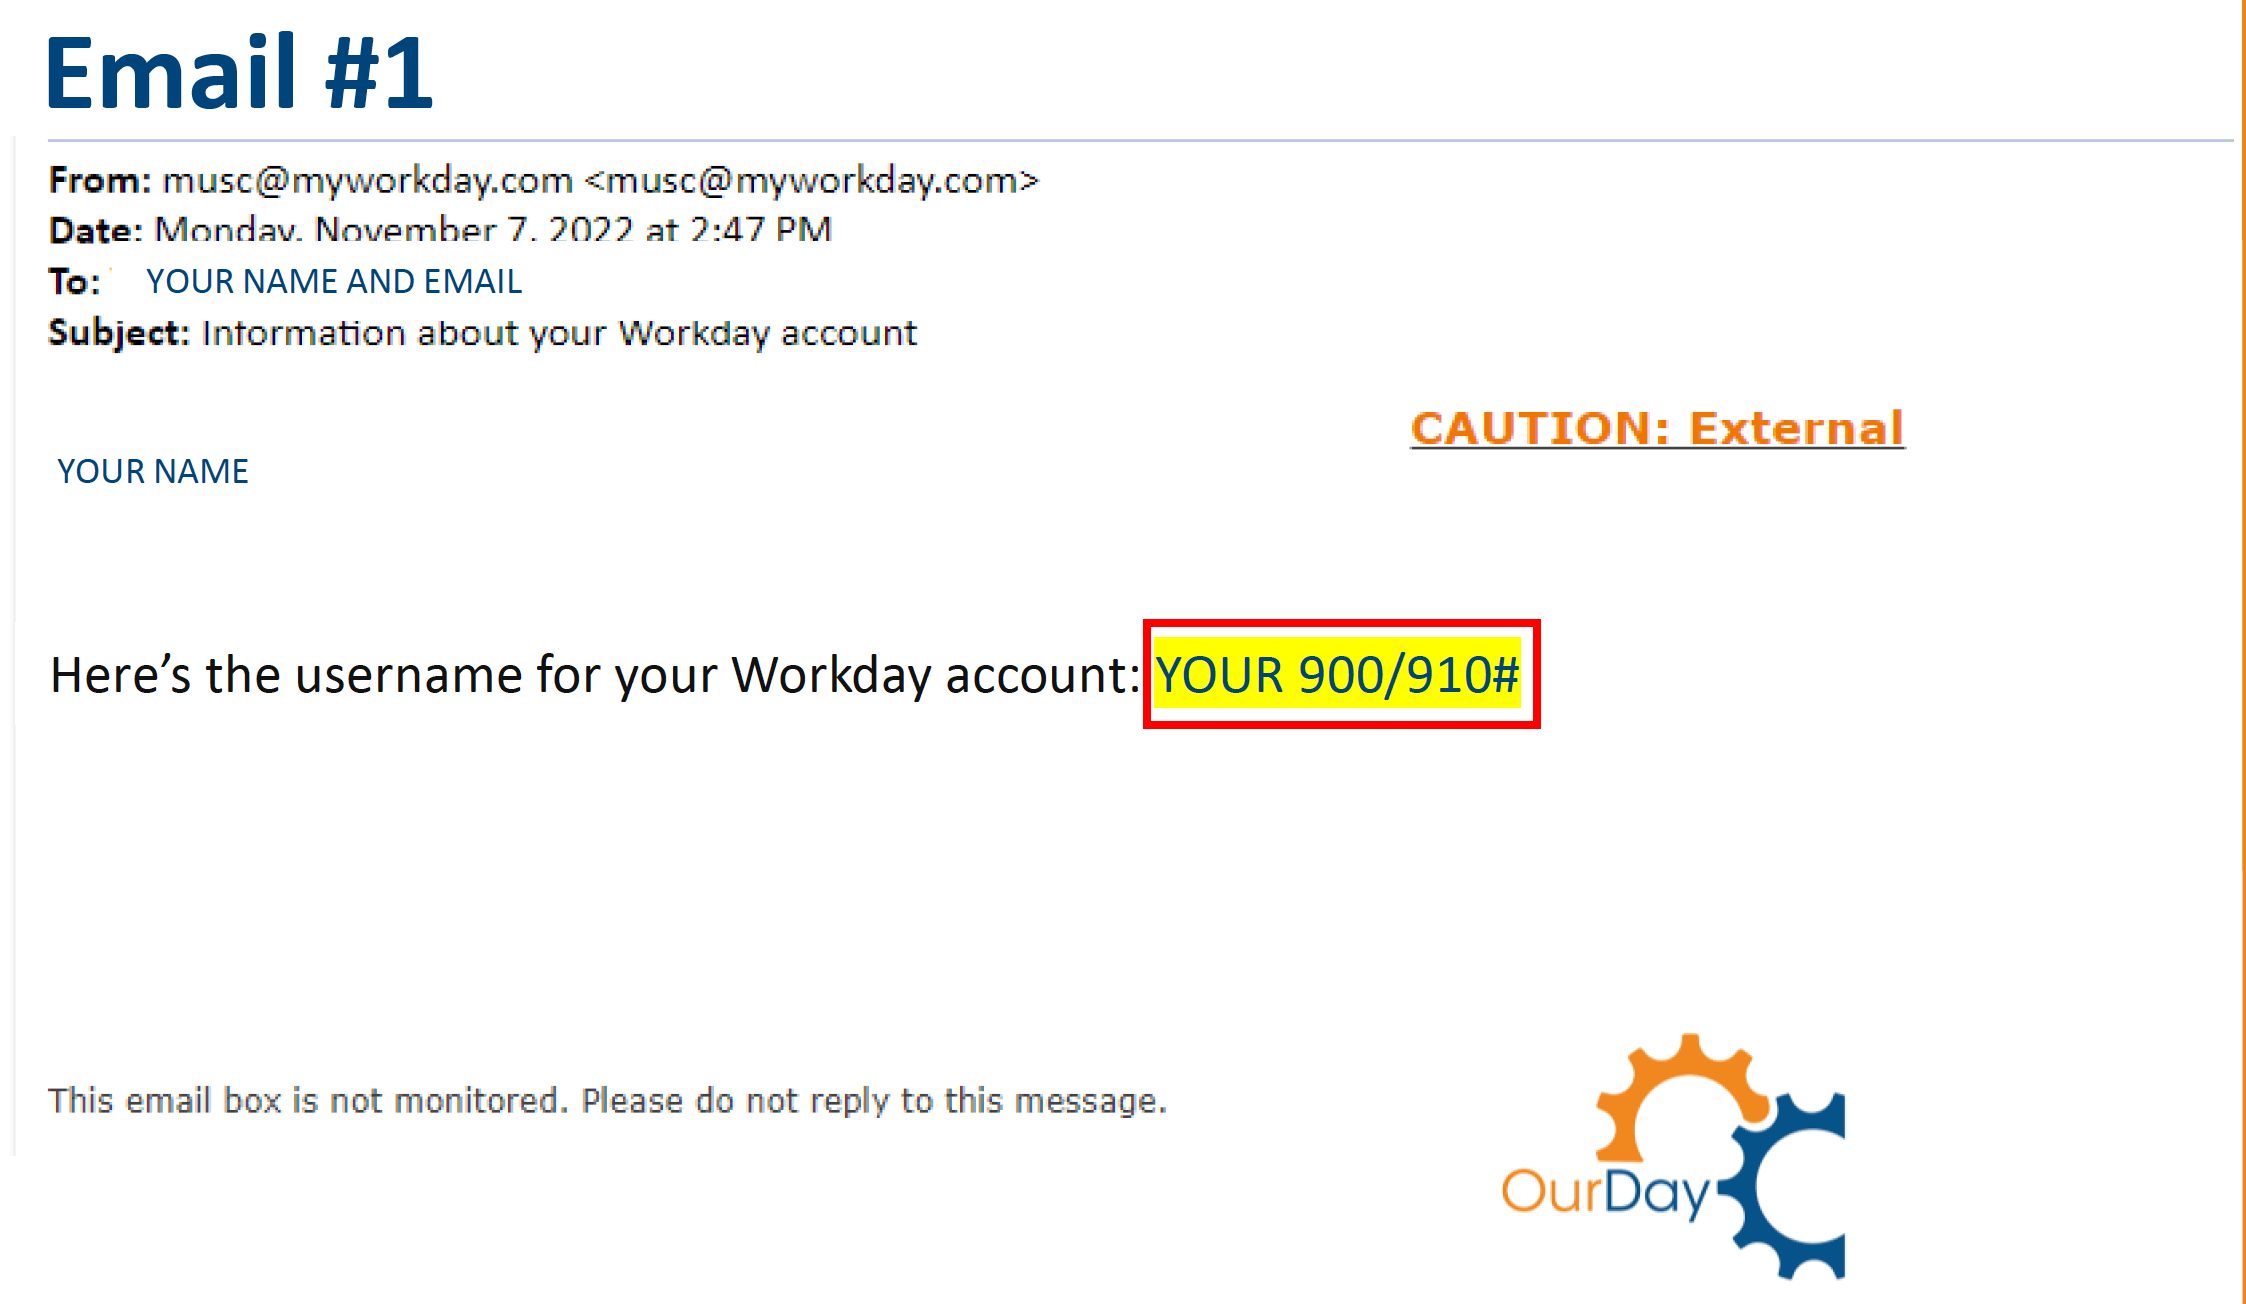 Sample email with Workday account number